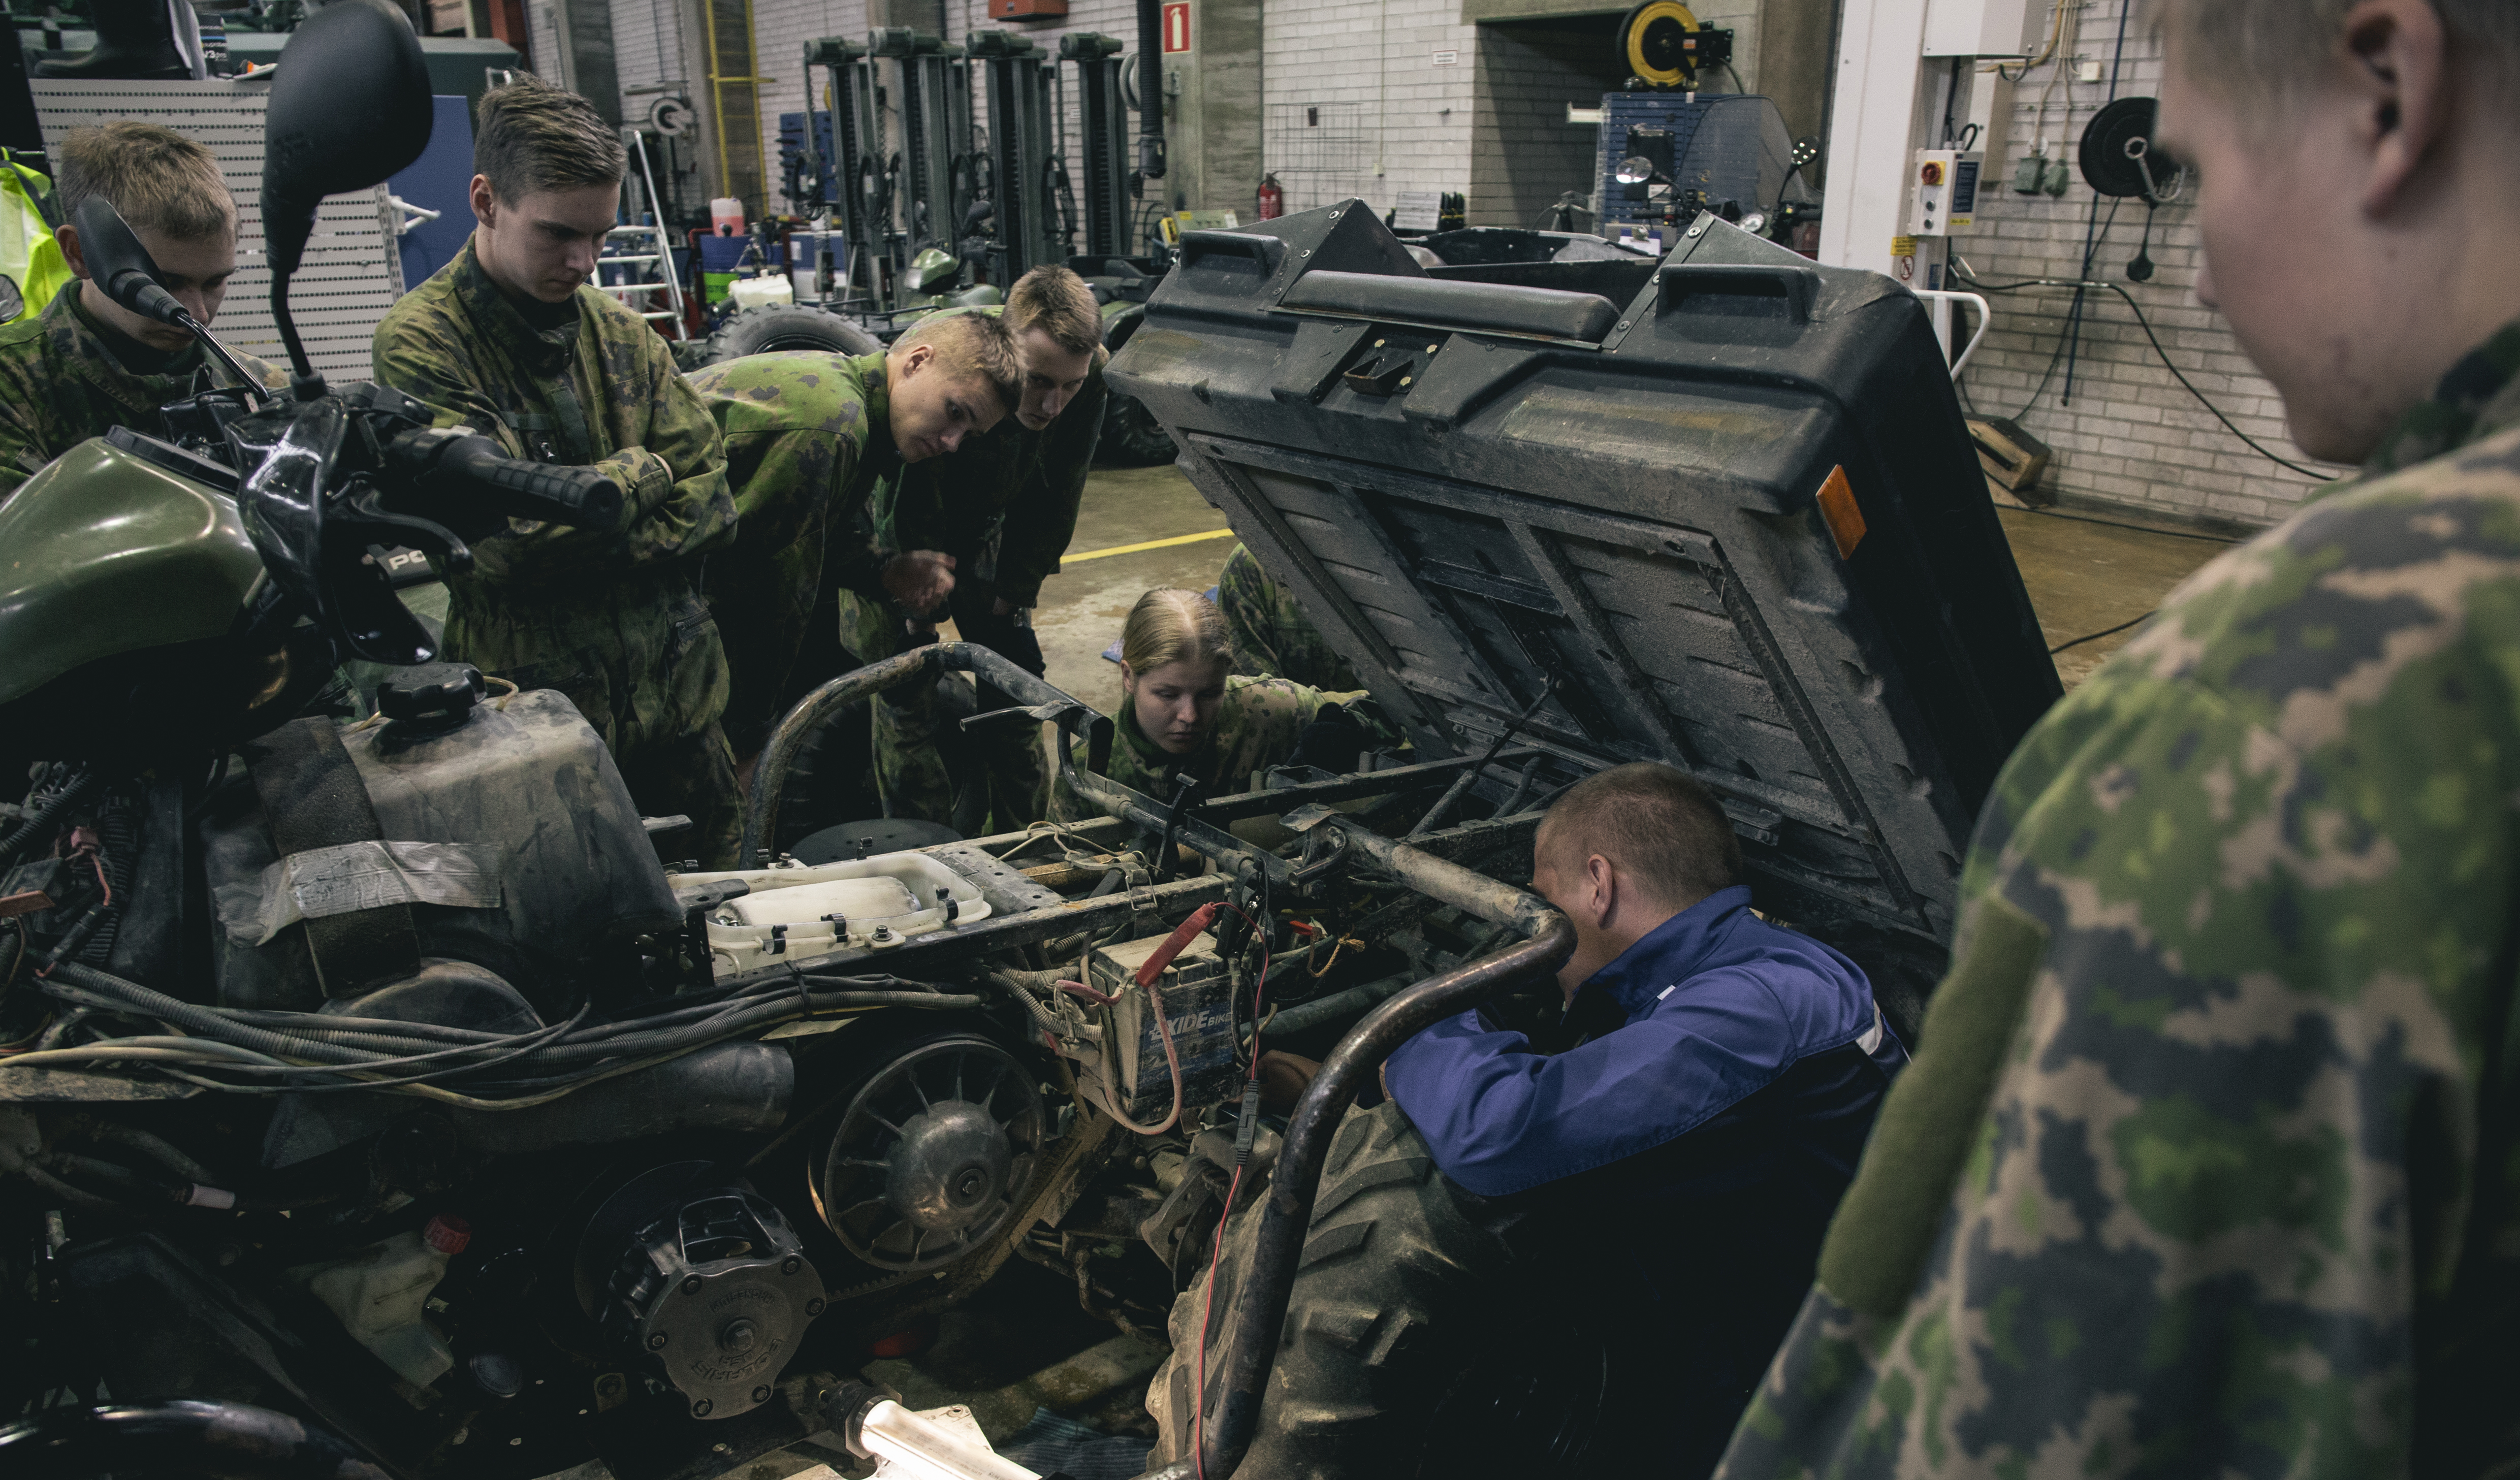 The man trains soldiers for quad bike maintenance by showing points of a dismantled quad bike.